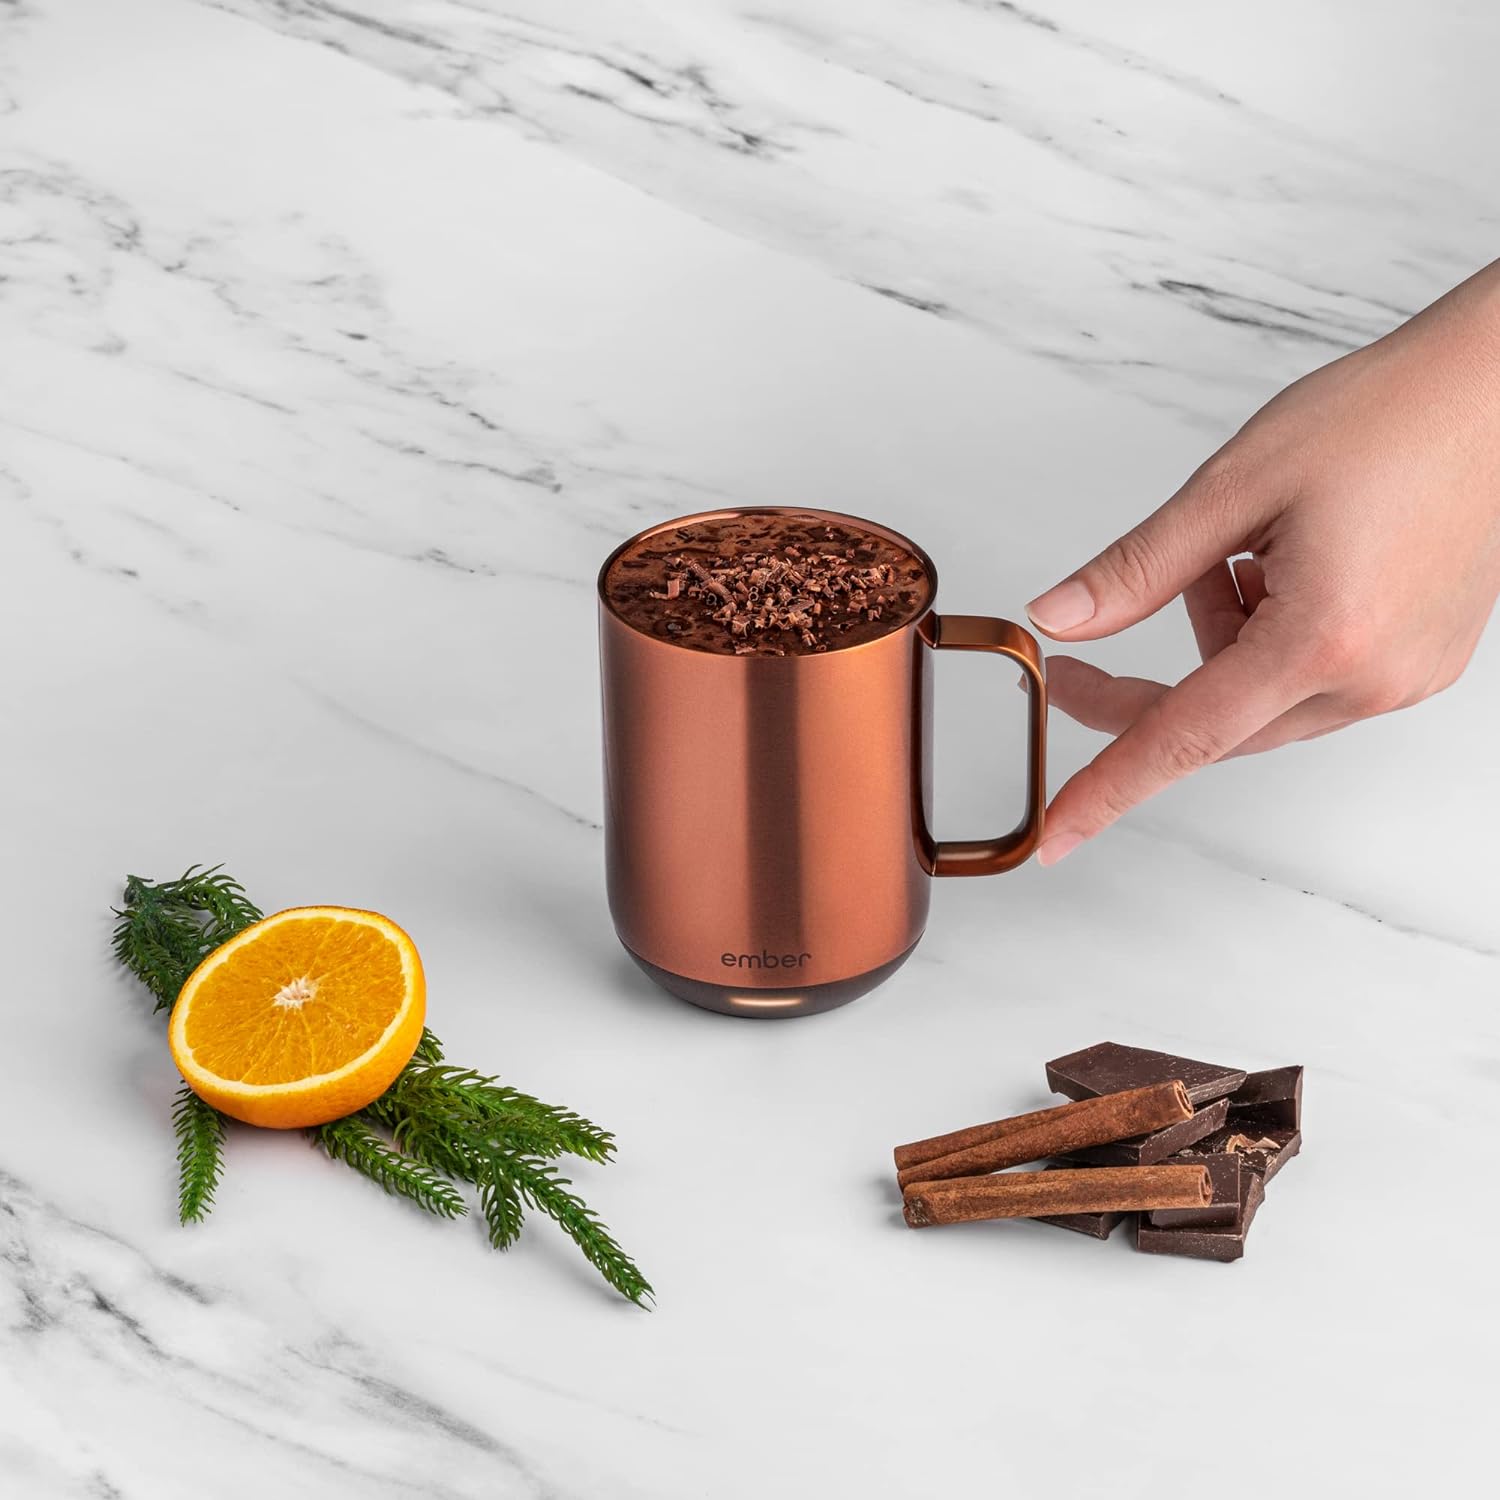 Ember Temperature Control Smart Mug 2, 14 Oz, App-Controlled Heated Coffee Mug with 80 Min Battery Life and Improved Design, Copper